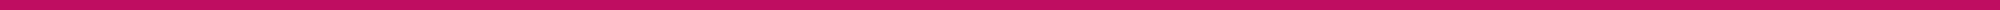 graphic of a pink page divider bar